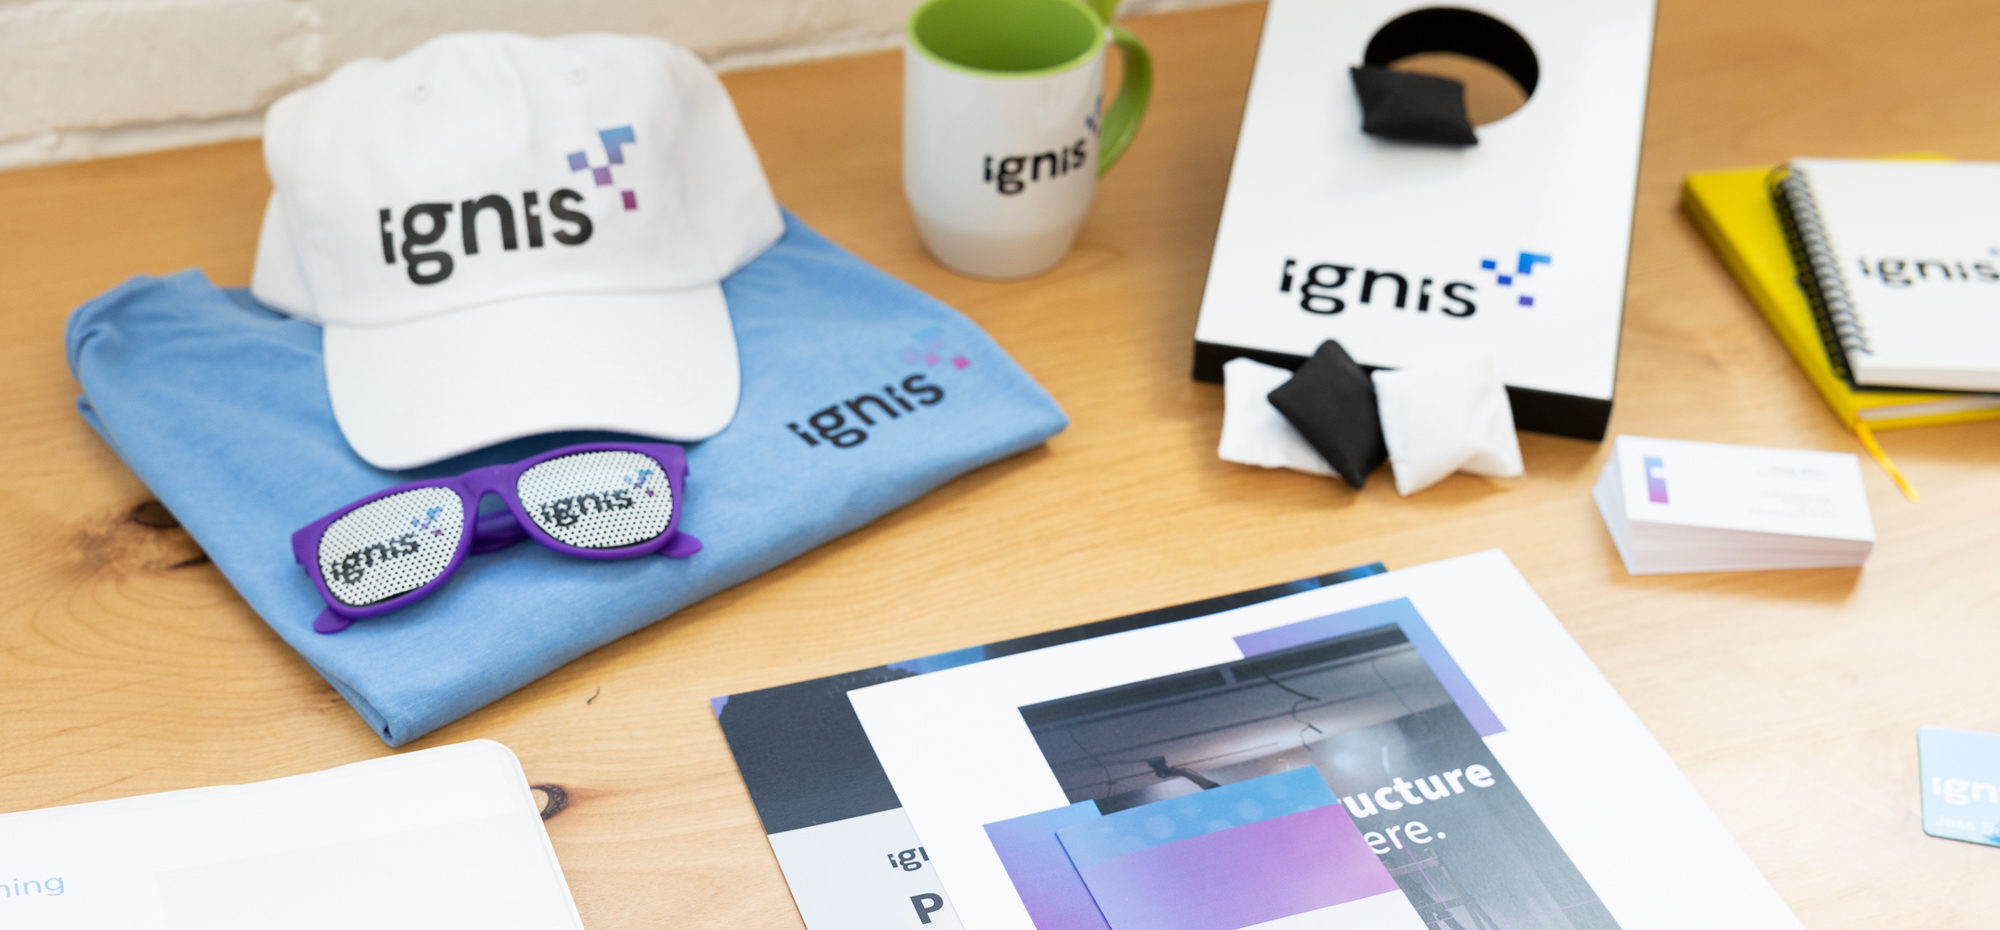 branded merchandise and printed products lay on a desk